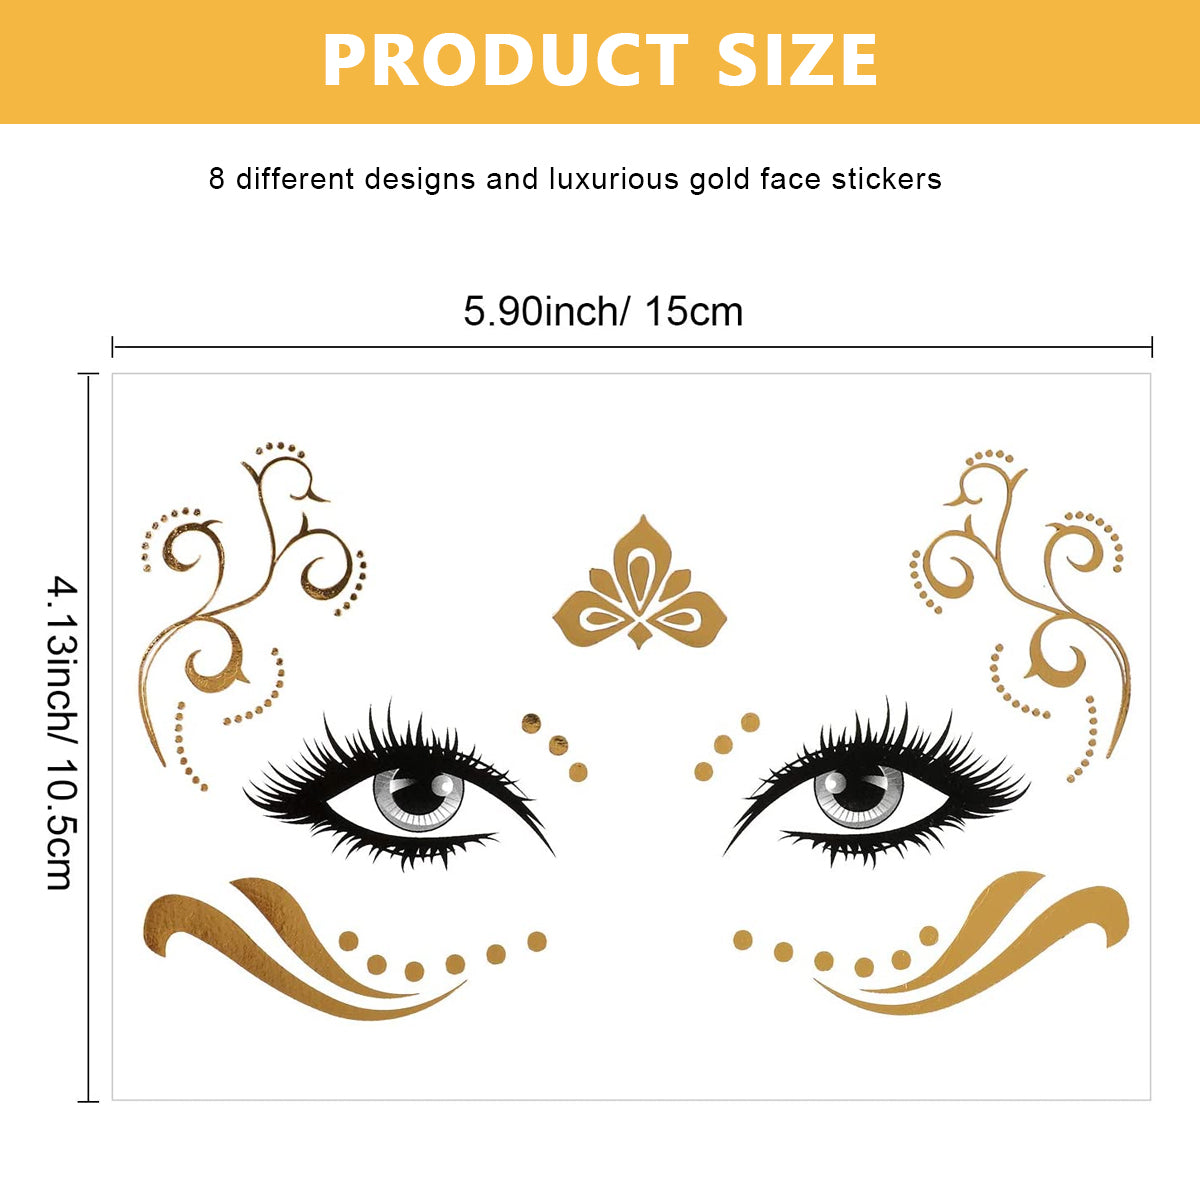 MAYCREATE Metallic Face Temporary Tattoo Stickers, 8 Sheets Eye Makeup Face Freckle Stickers Glitter Gold Water Transfer Tattoo Stickers for Women Girls Party Halloween Dancer